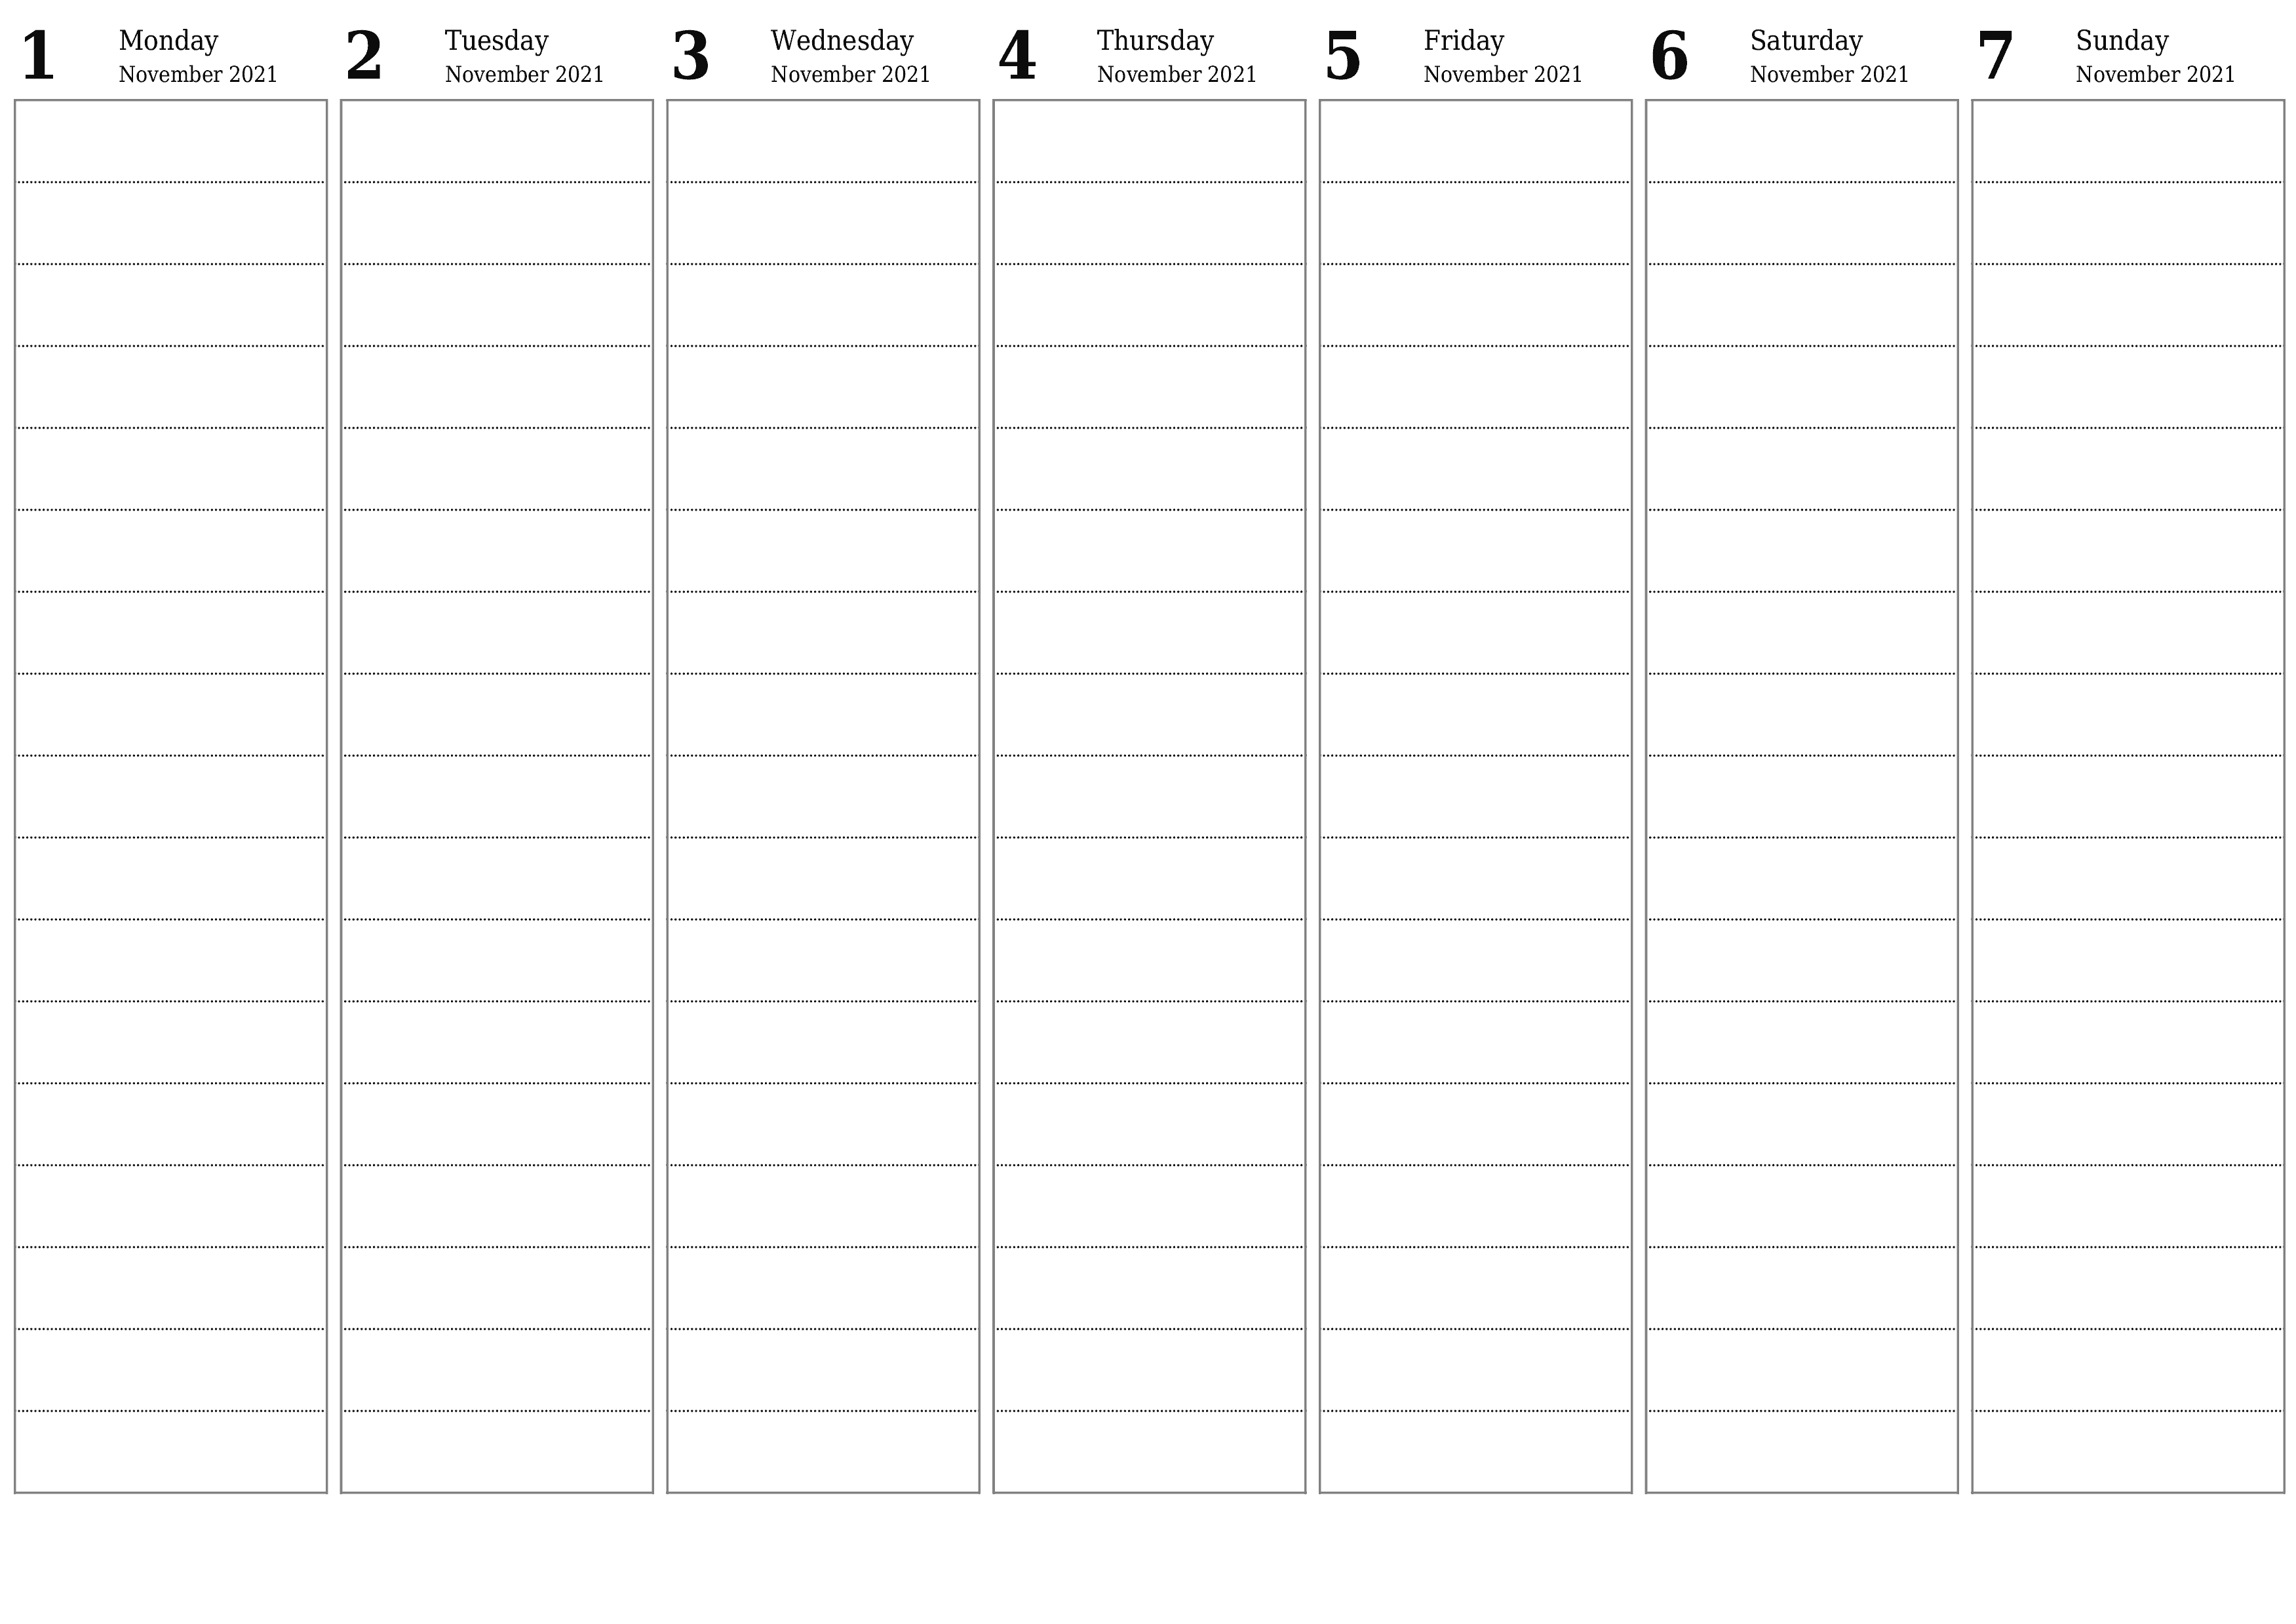 Blank weekly printable calendar and planner for week November 2021 with notes, save and print to PDF PNG English